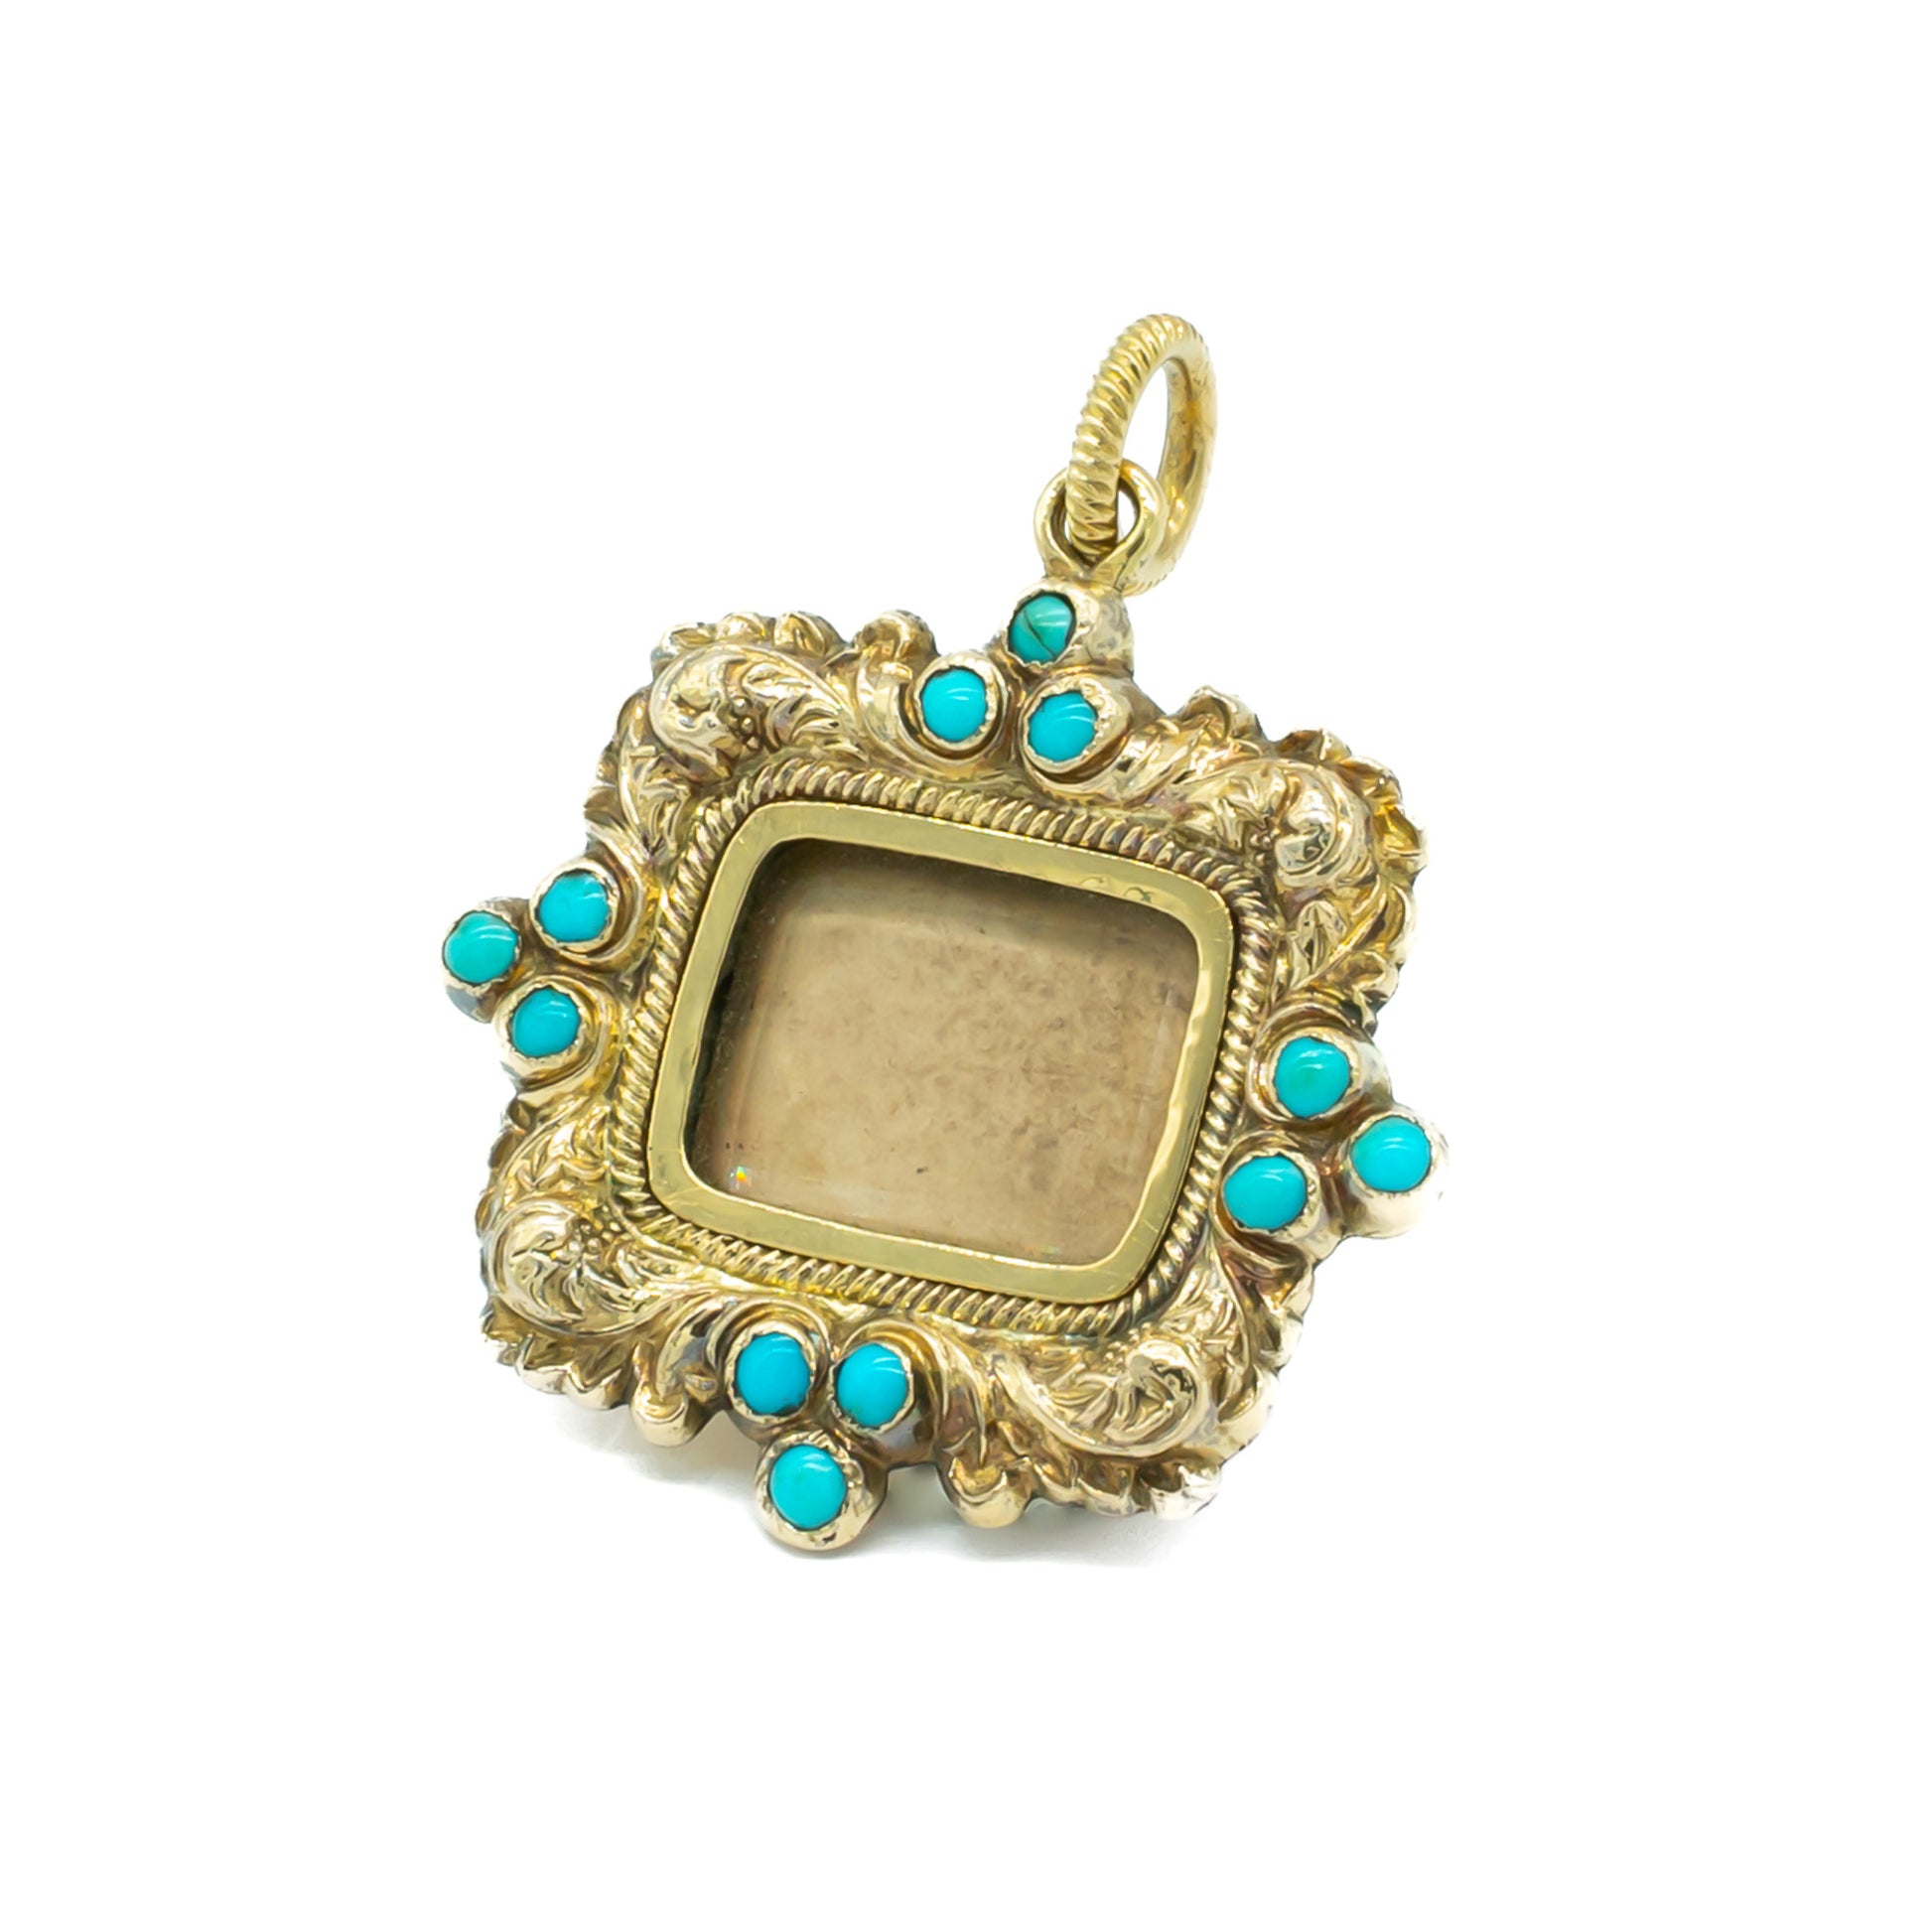 Exquisite Georgian 9ct gold cased mourning pendant set with 12 small round turquoise stones. Rectangular piece of glass in centre - ideal for photo.